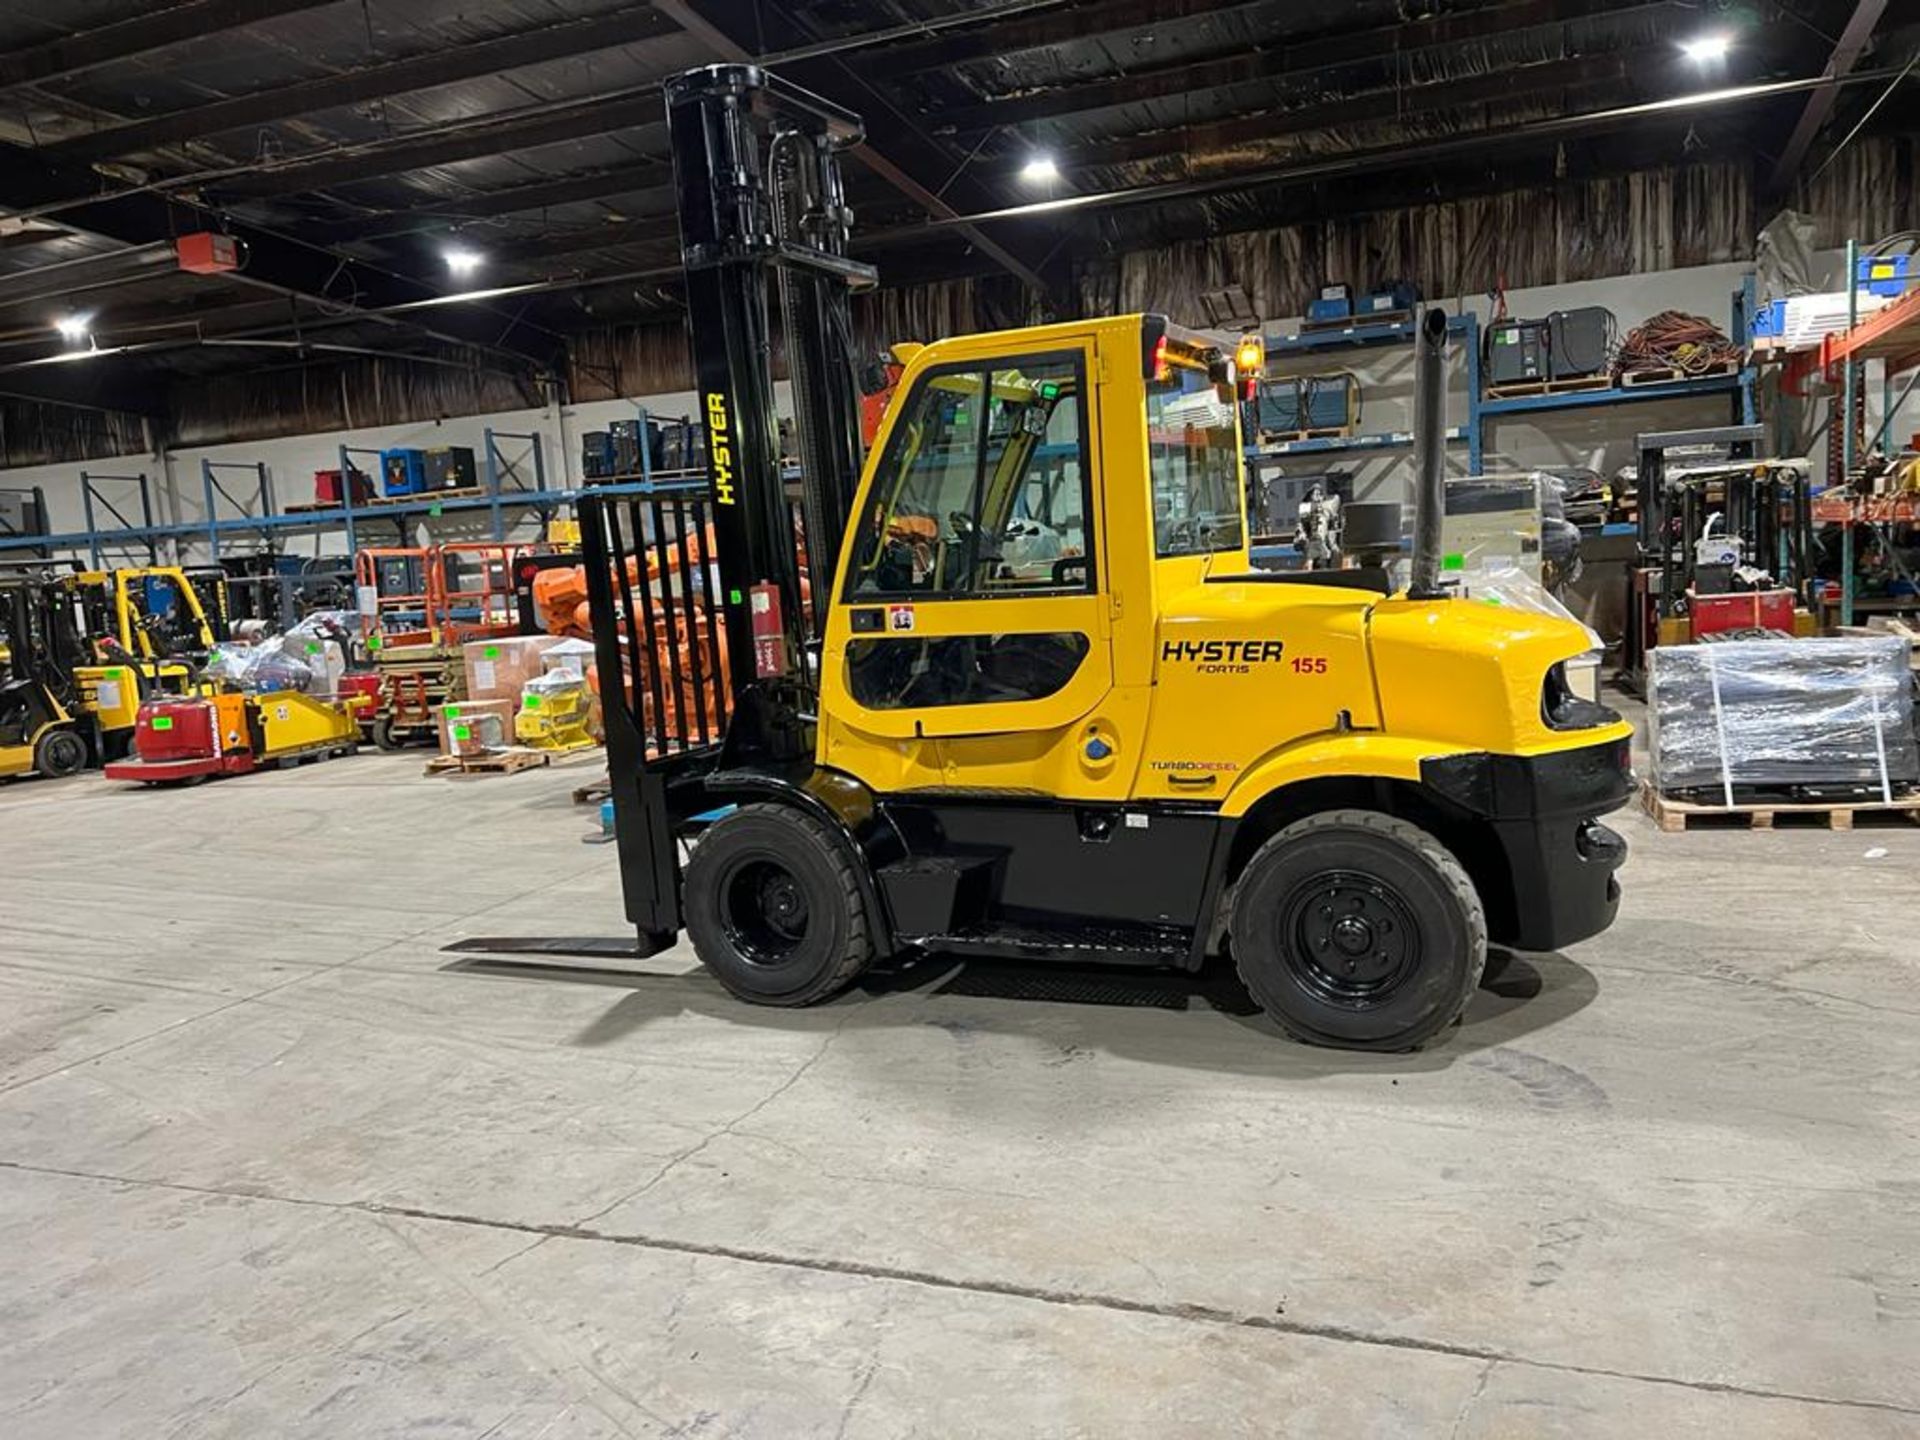 NICE 2017 Hyster model 155 - 15,500lbs Capacity OUTDOOR Forklift Diesel with CAB sideshift